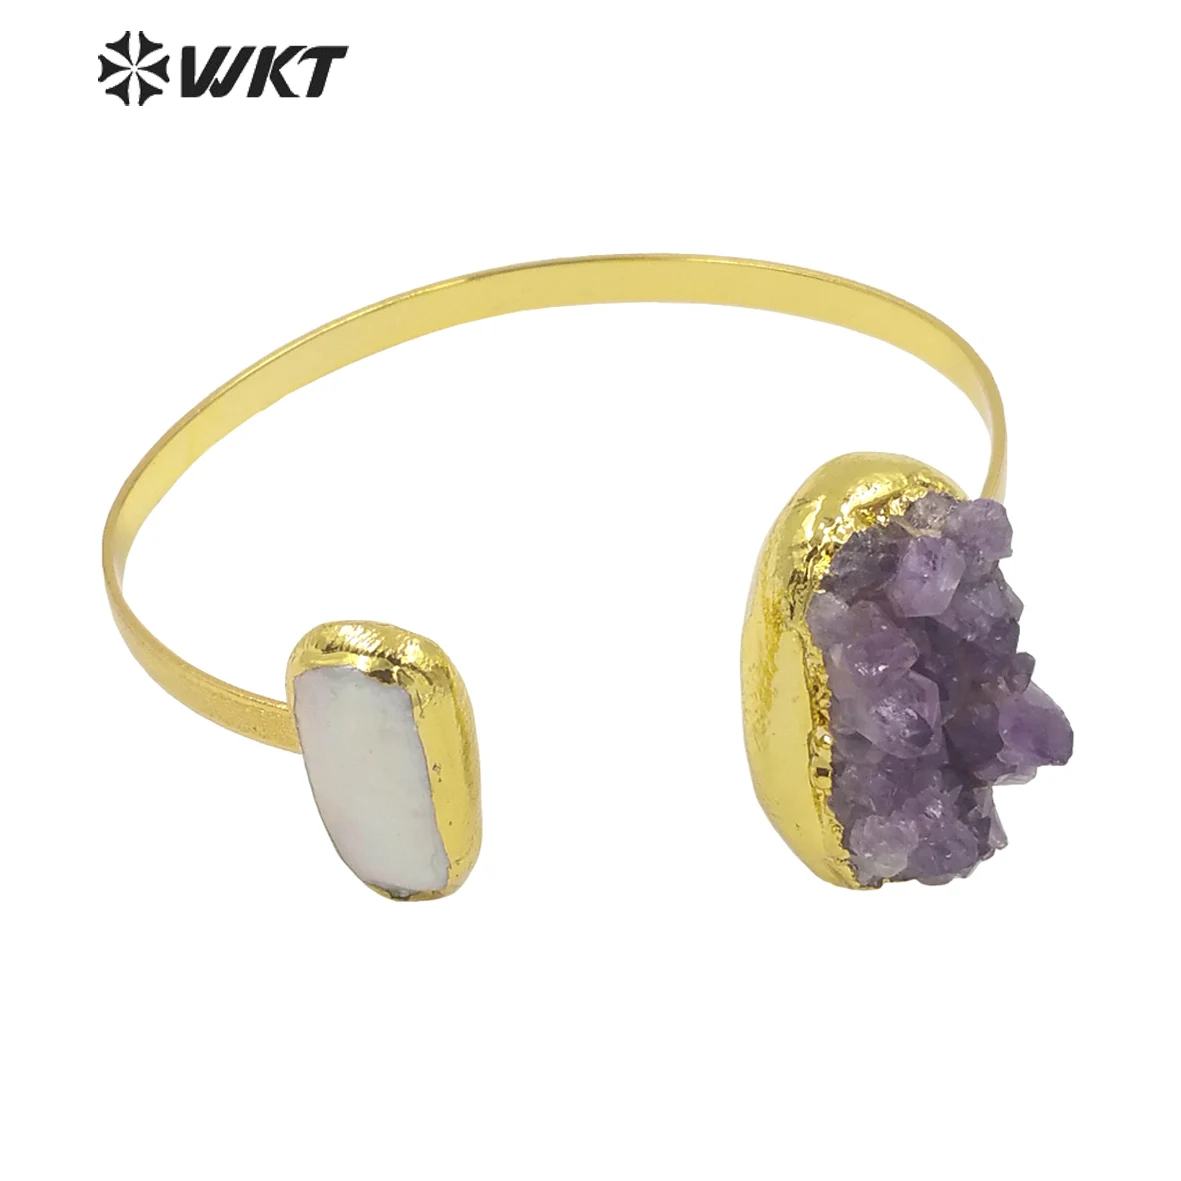 

WT-B582 WKT Beautiful And Attractive Gold Electroplated Open Size Cuff Bangle Women Exquisite Natural Amethysts Decorative